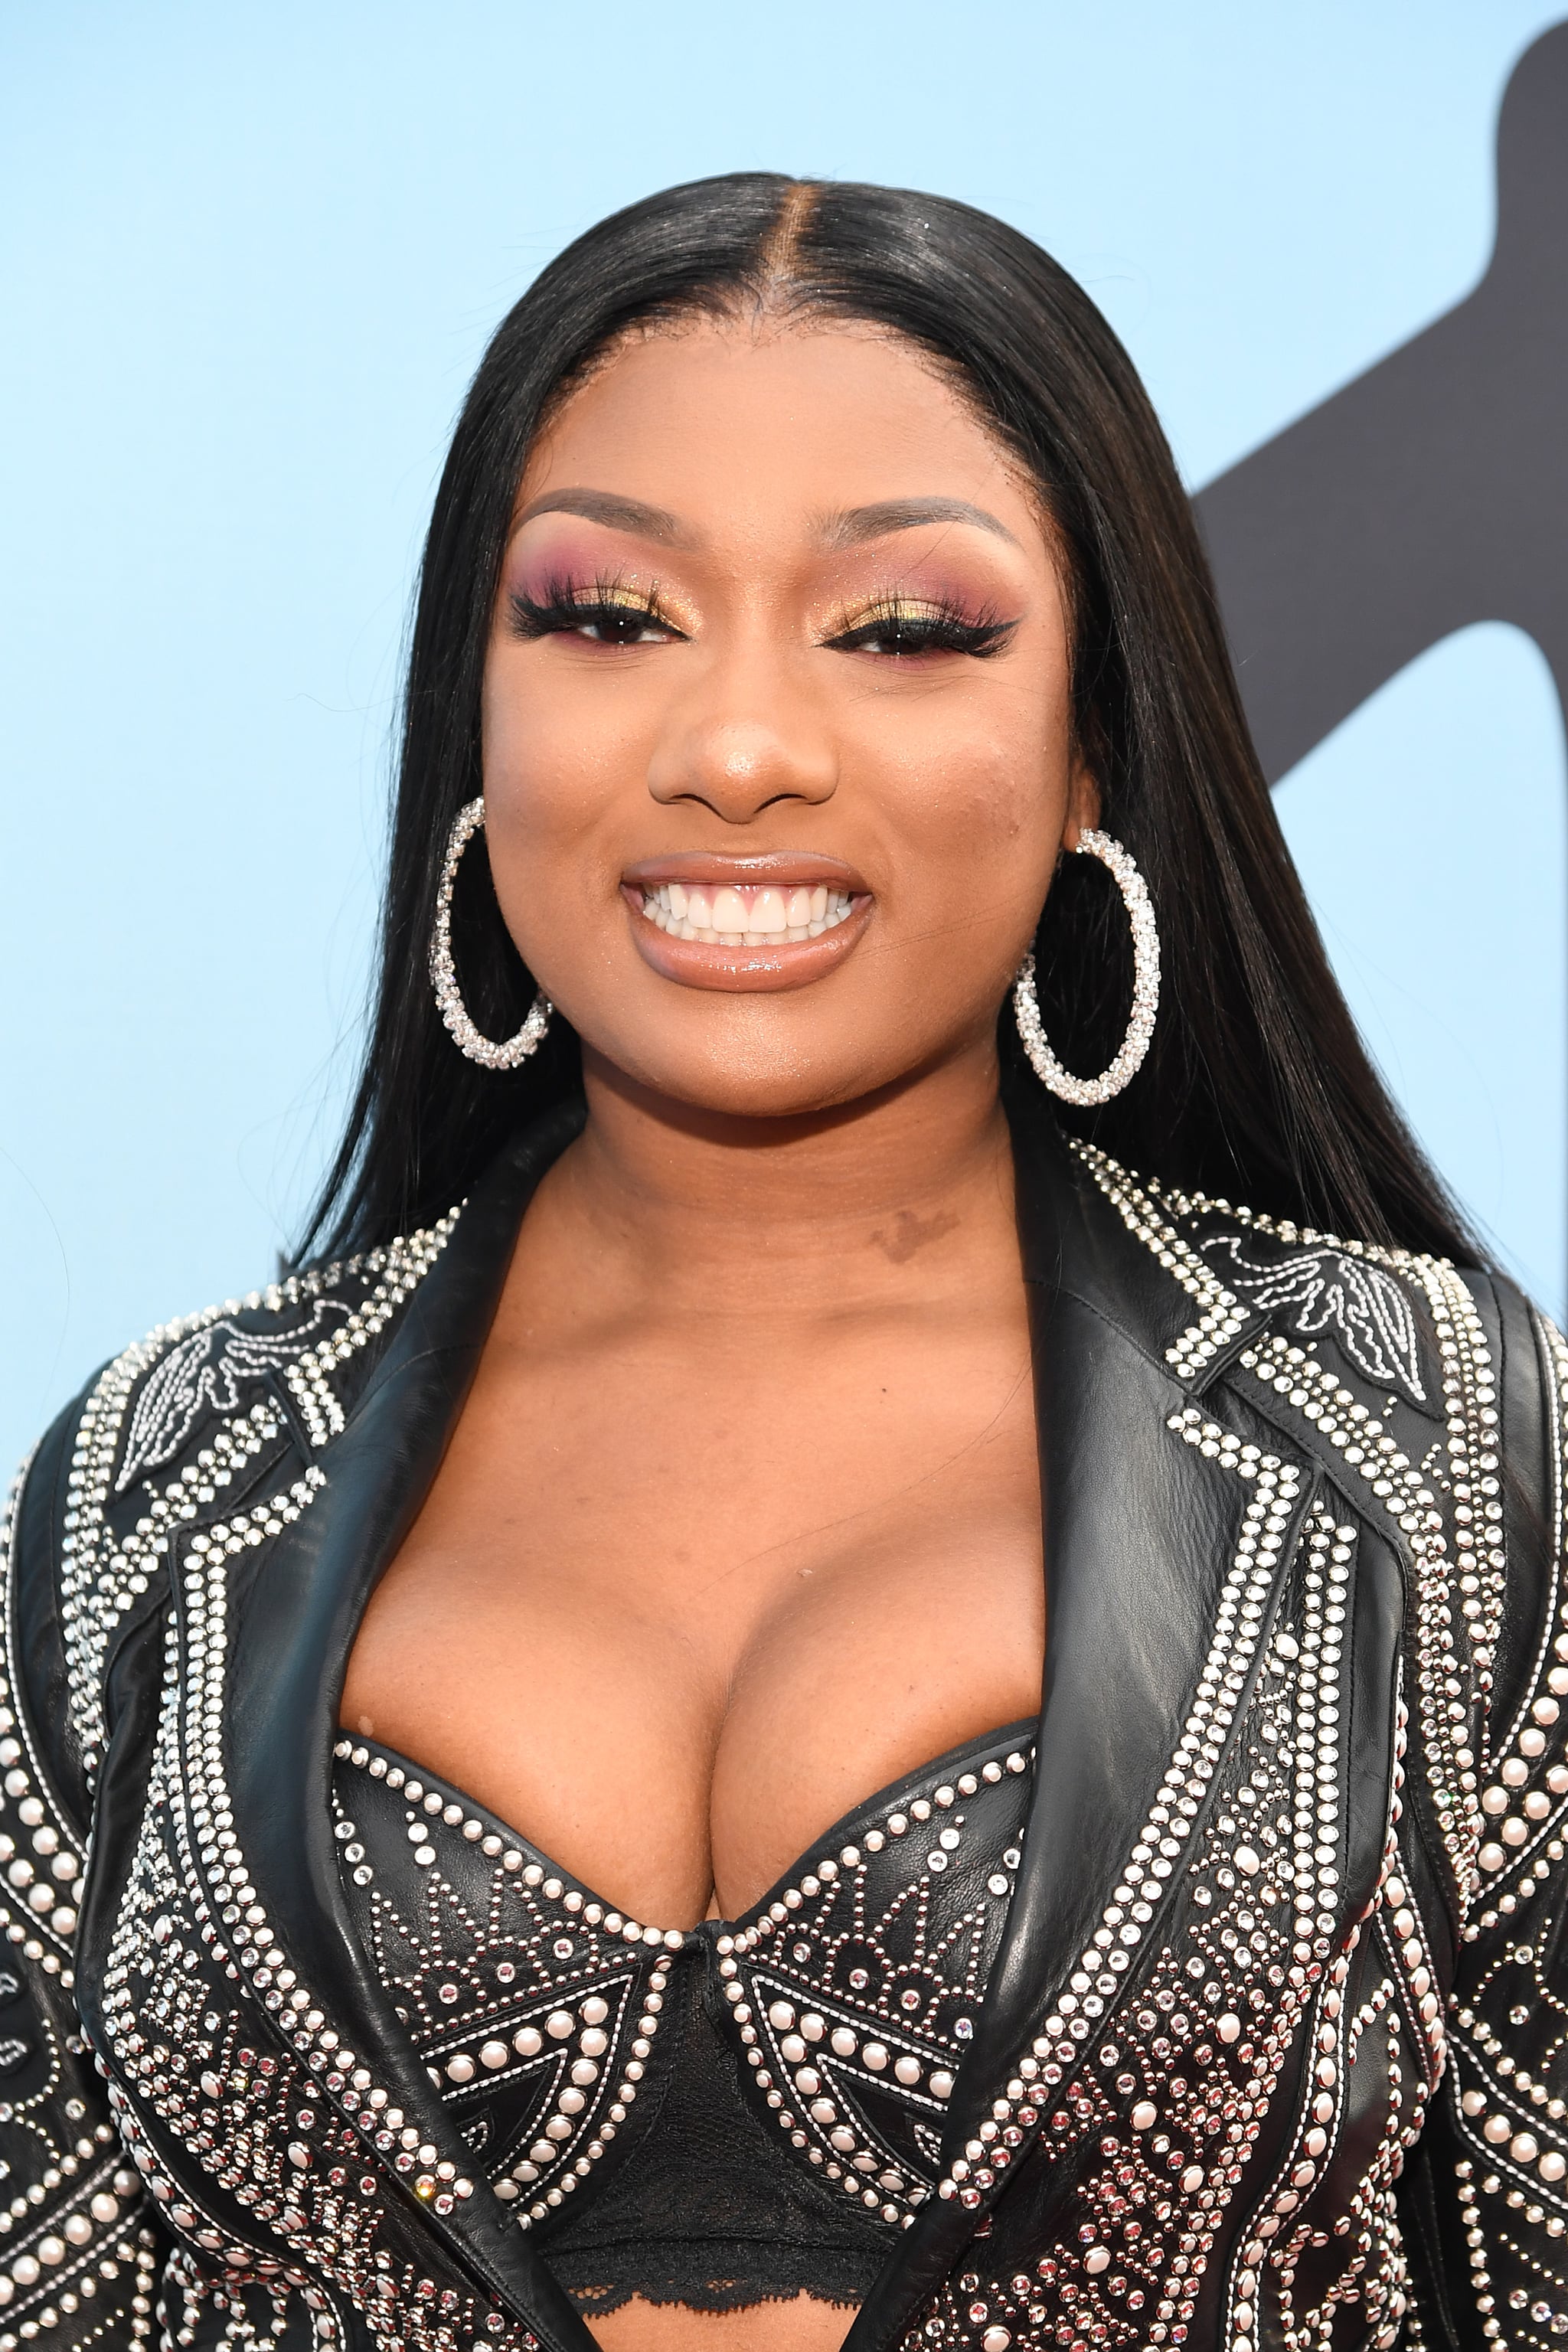 NEWARK, NEW JERSEY - AUGUST 26: Megan Thee Stallion attends the 2019 MTV Video Music Awards at Prudential Center on August 26, 2019 in Newark, New Jersey. (Photo by Kevin Mazur/WireImage)